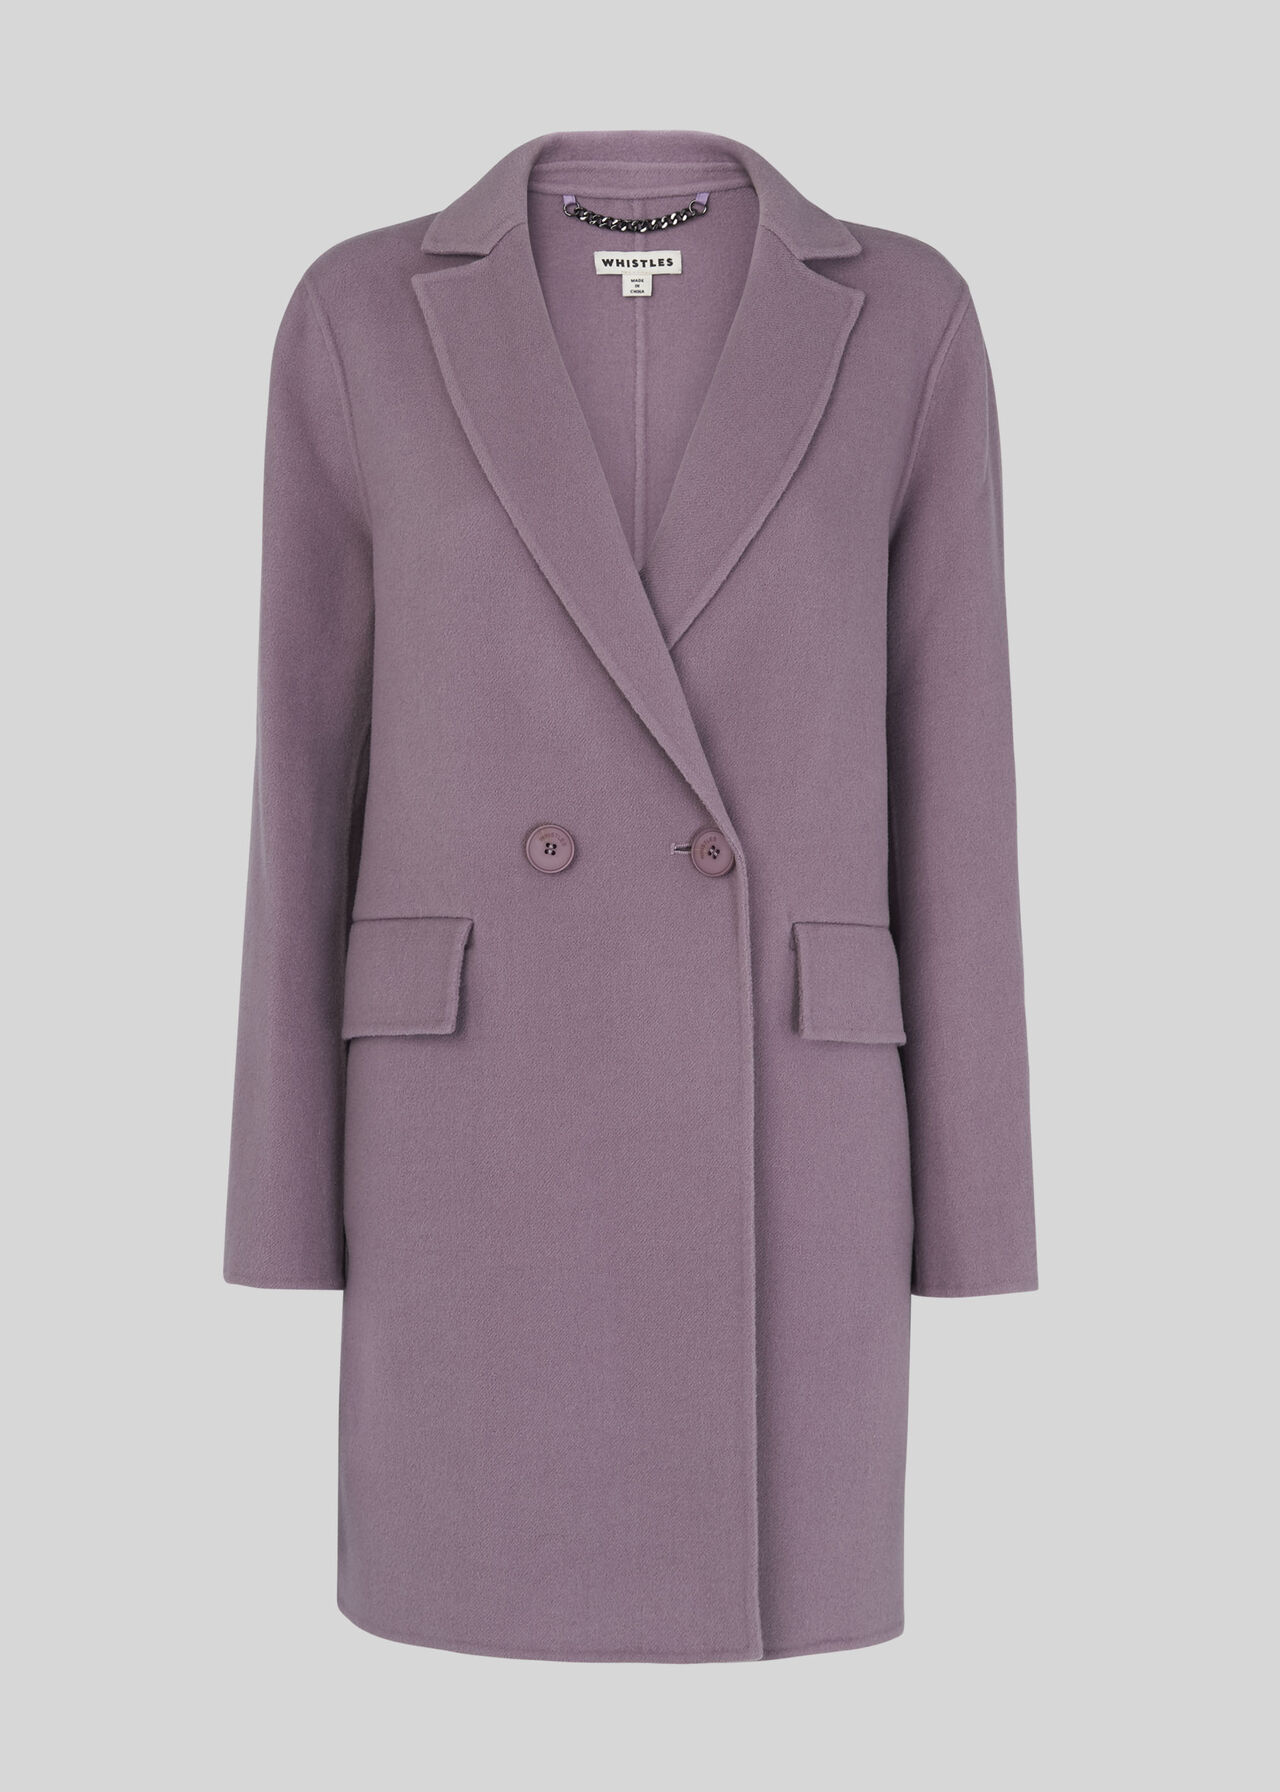 Lilac Double Faced Wool Coat | WHISTLES